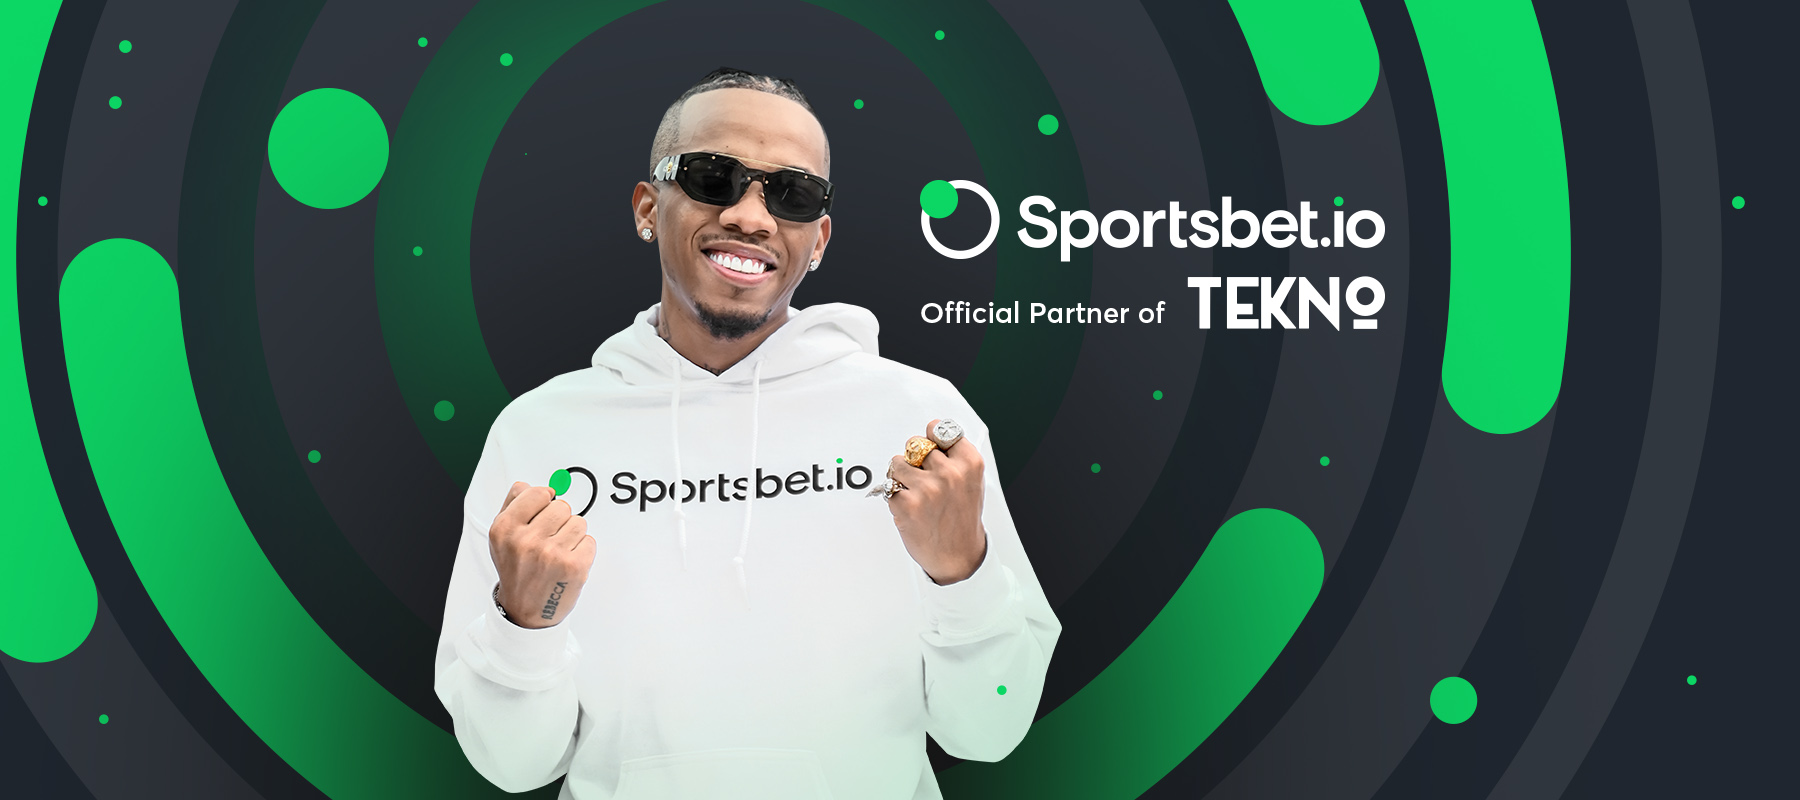 Feel the beat with Sportsbet’s new ambassador Tekno Miles